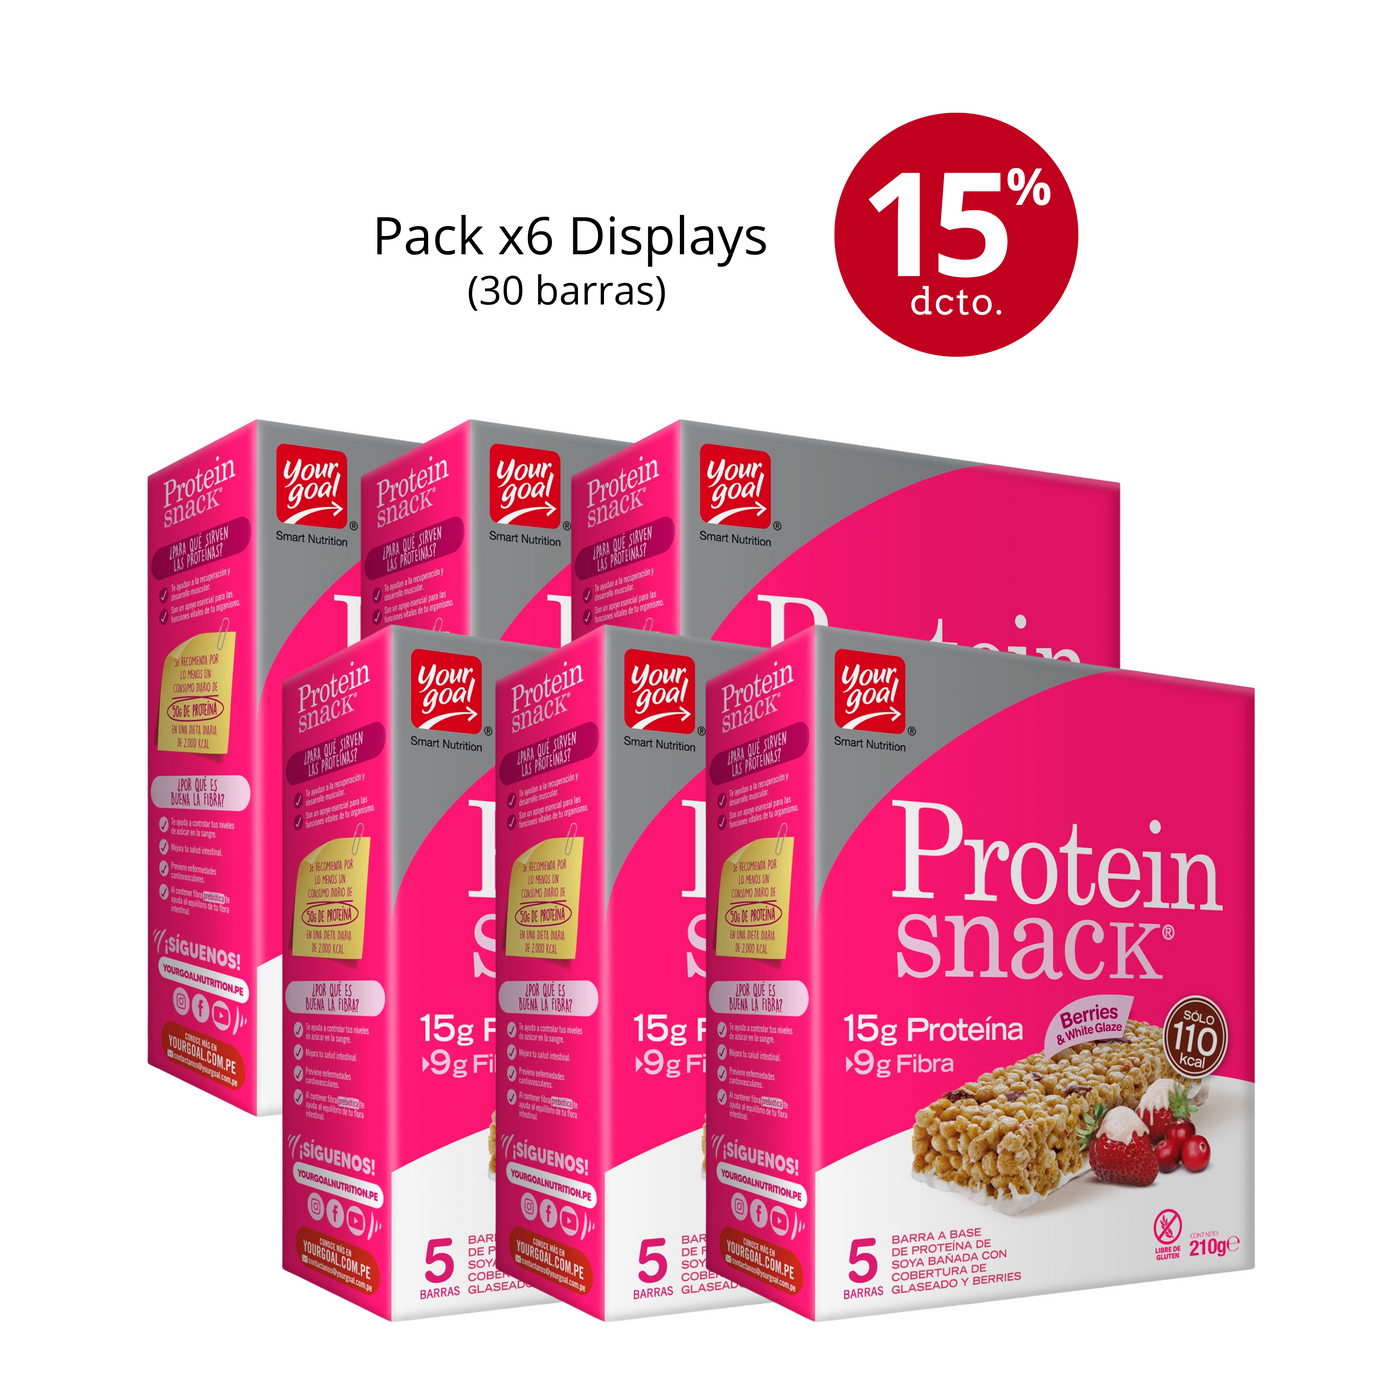 PACK X6 DISPLAYS PROTEIN SNACK (30 BARRAS)